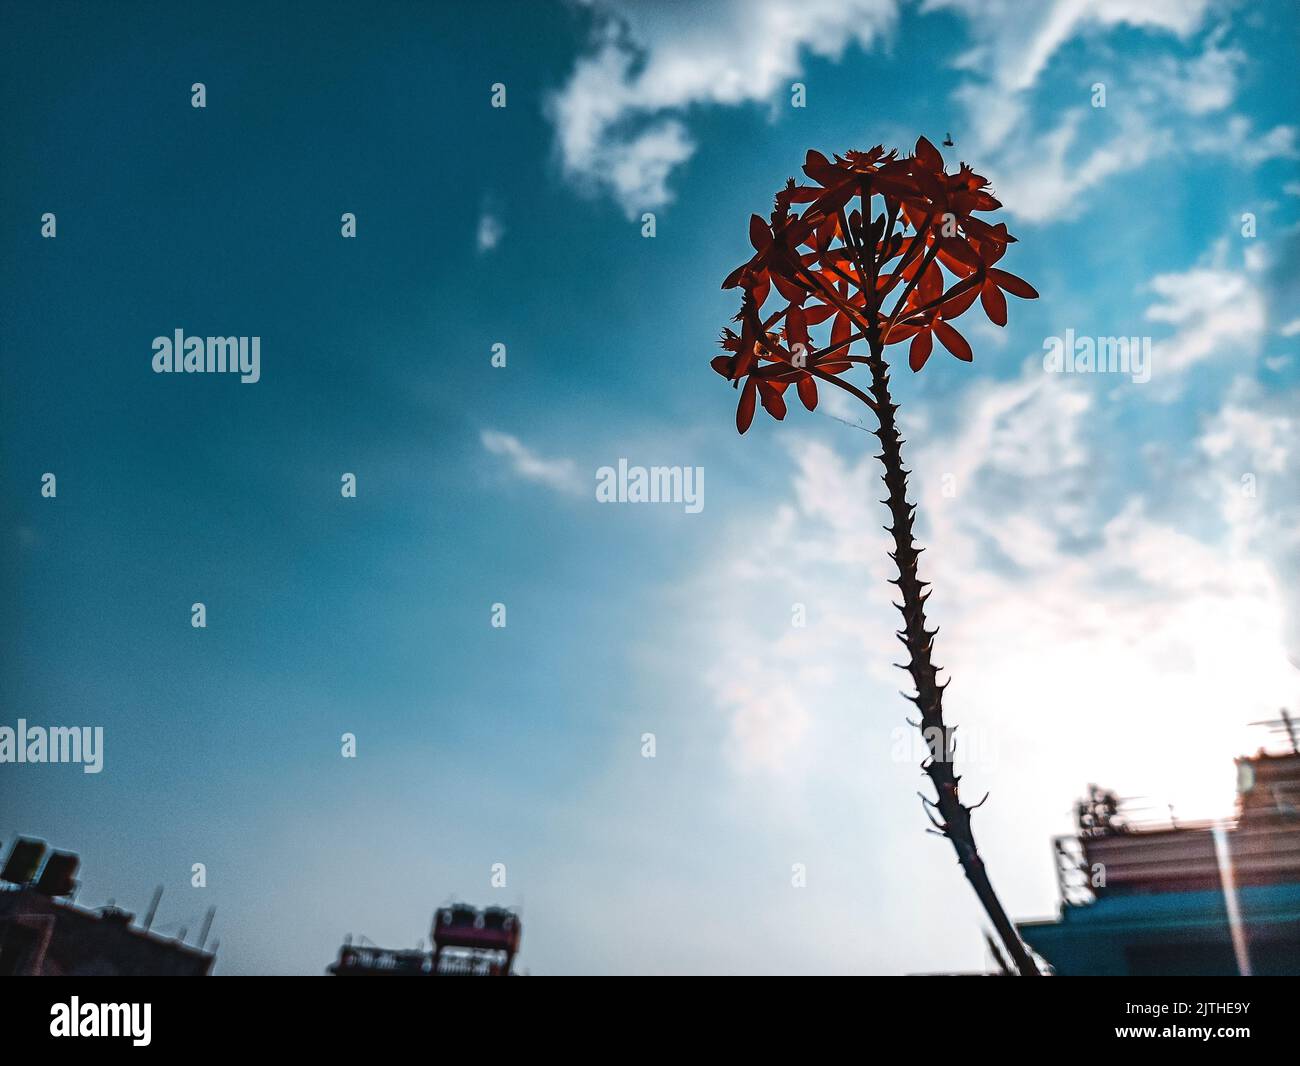 A focus shot of a red Epidendrum Secundum flower with a clear blue sky in the background. Parts of industrial buildings are seen. Stock Photo